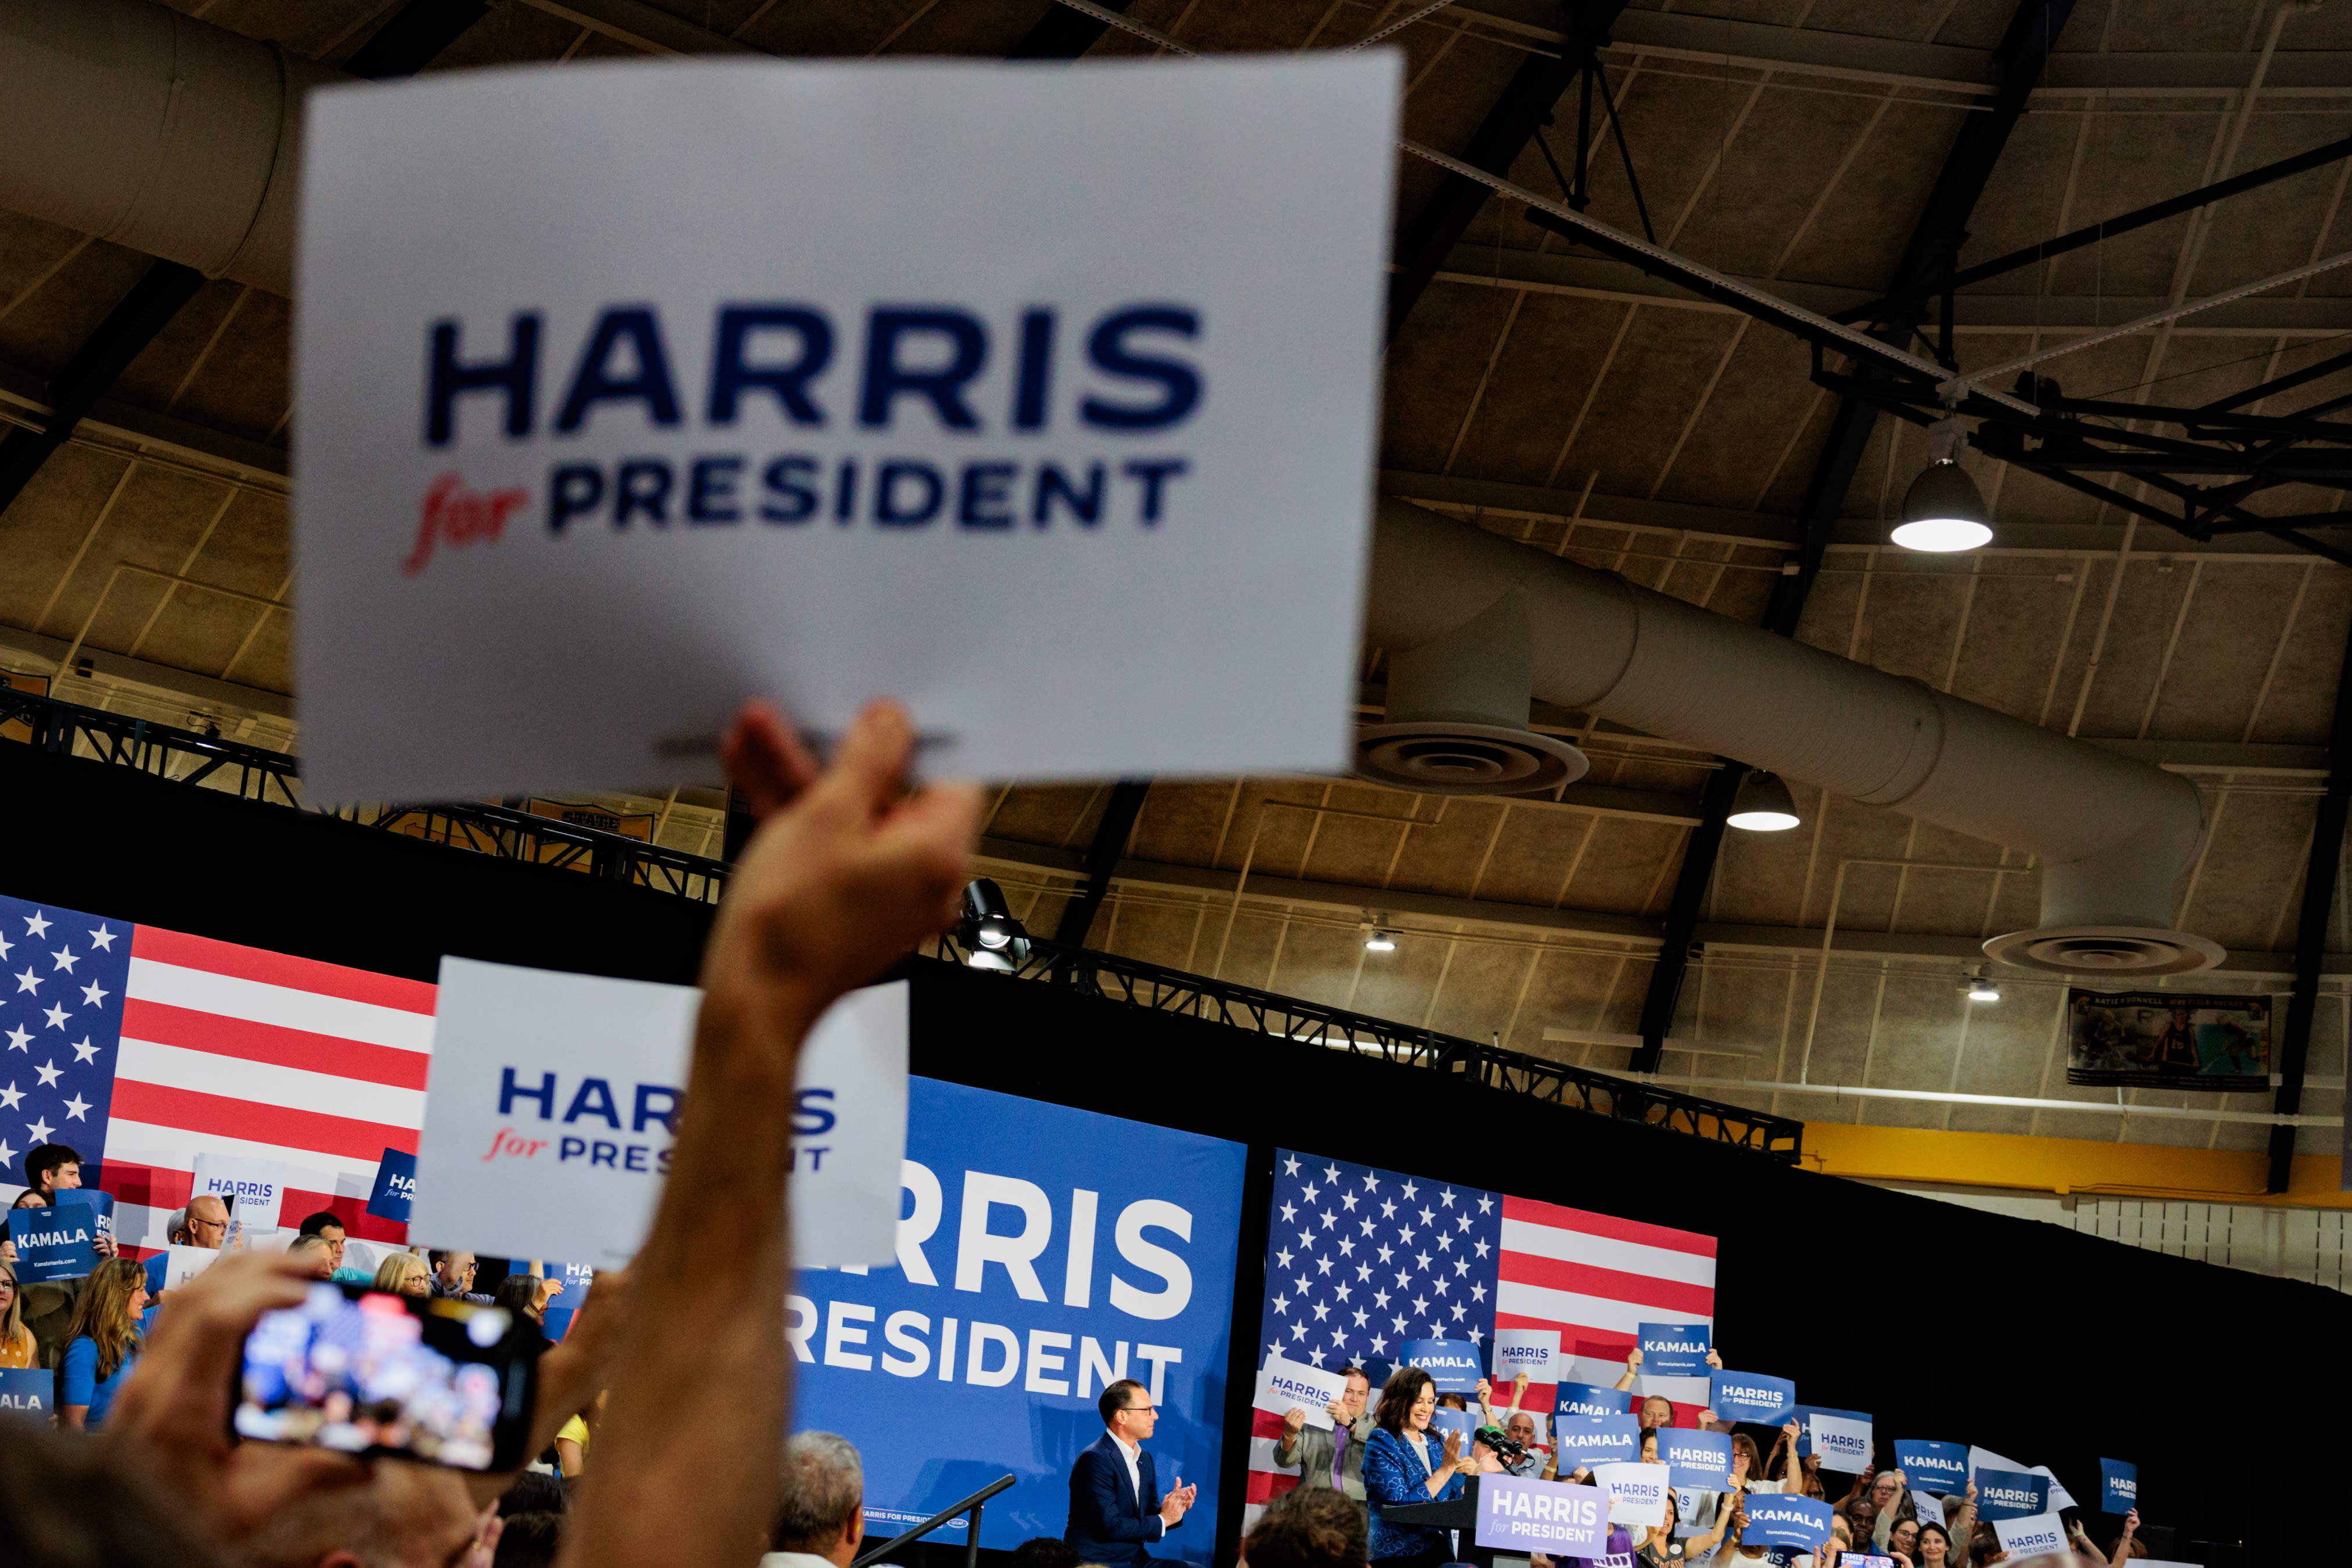 Harris campaign pulls in cash from ‘white dudes’ and women in online events